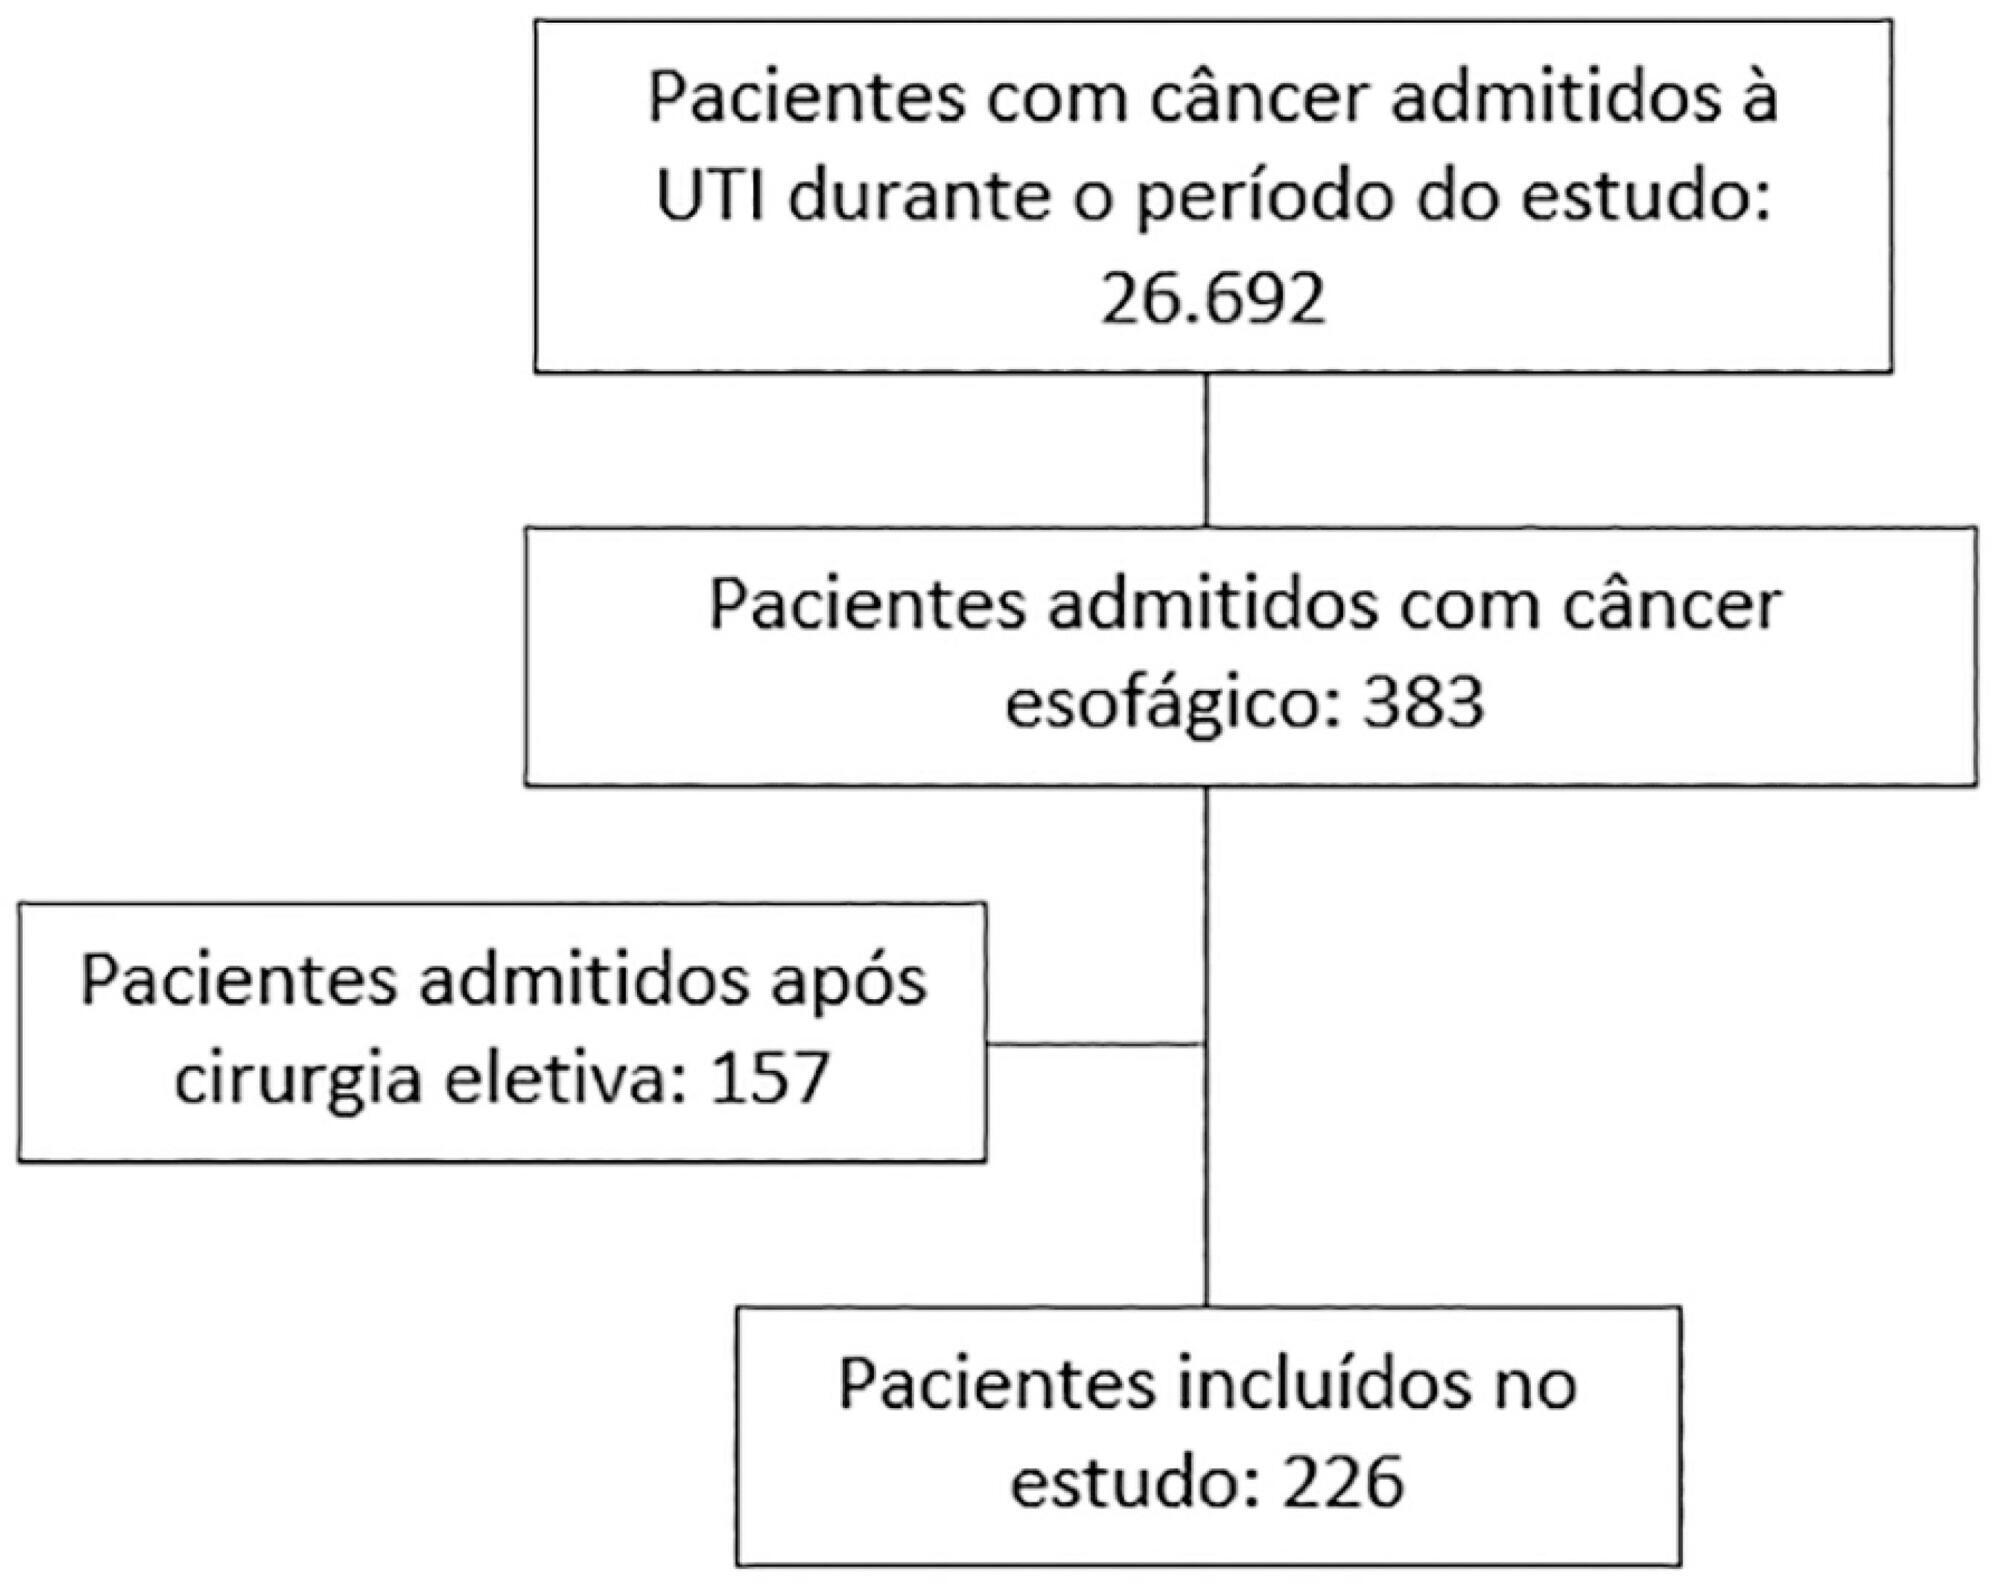 Characteristics and short-term outcomes of patients with esophageal cancer with unplanned intensive care unit admissions: a retrospective cohort study